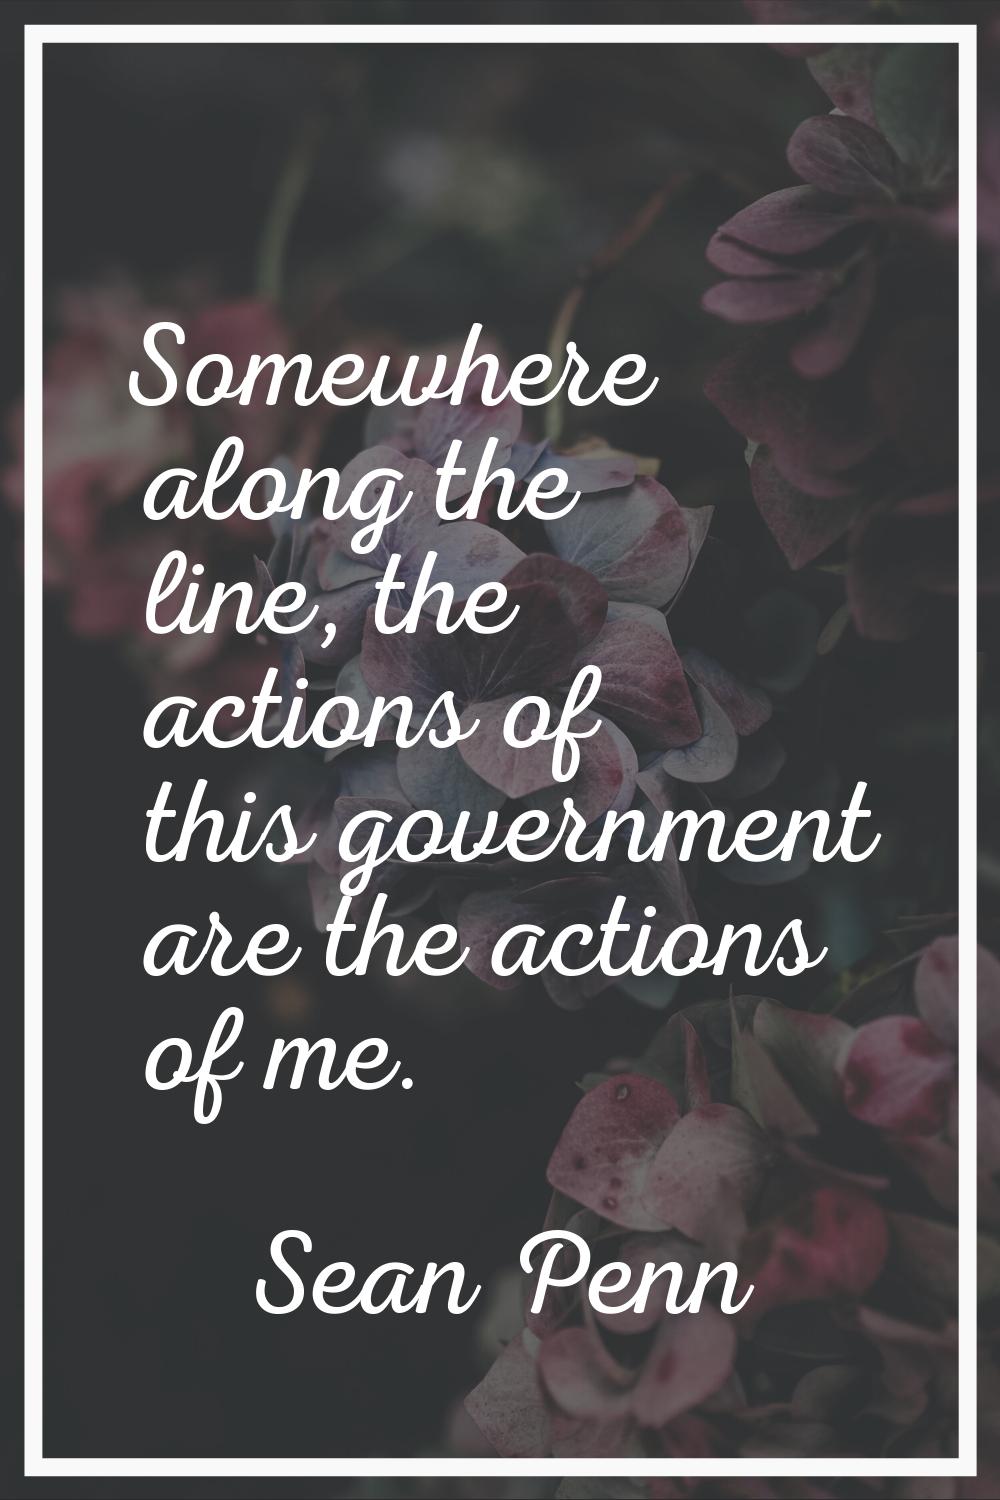 Somewhere along the line, the actions of this government are the actions of me.